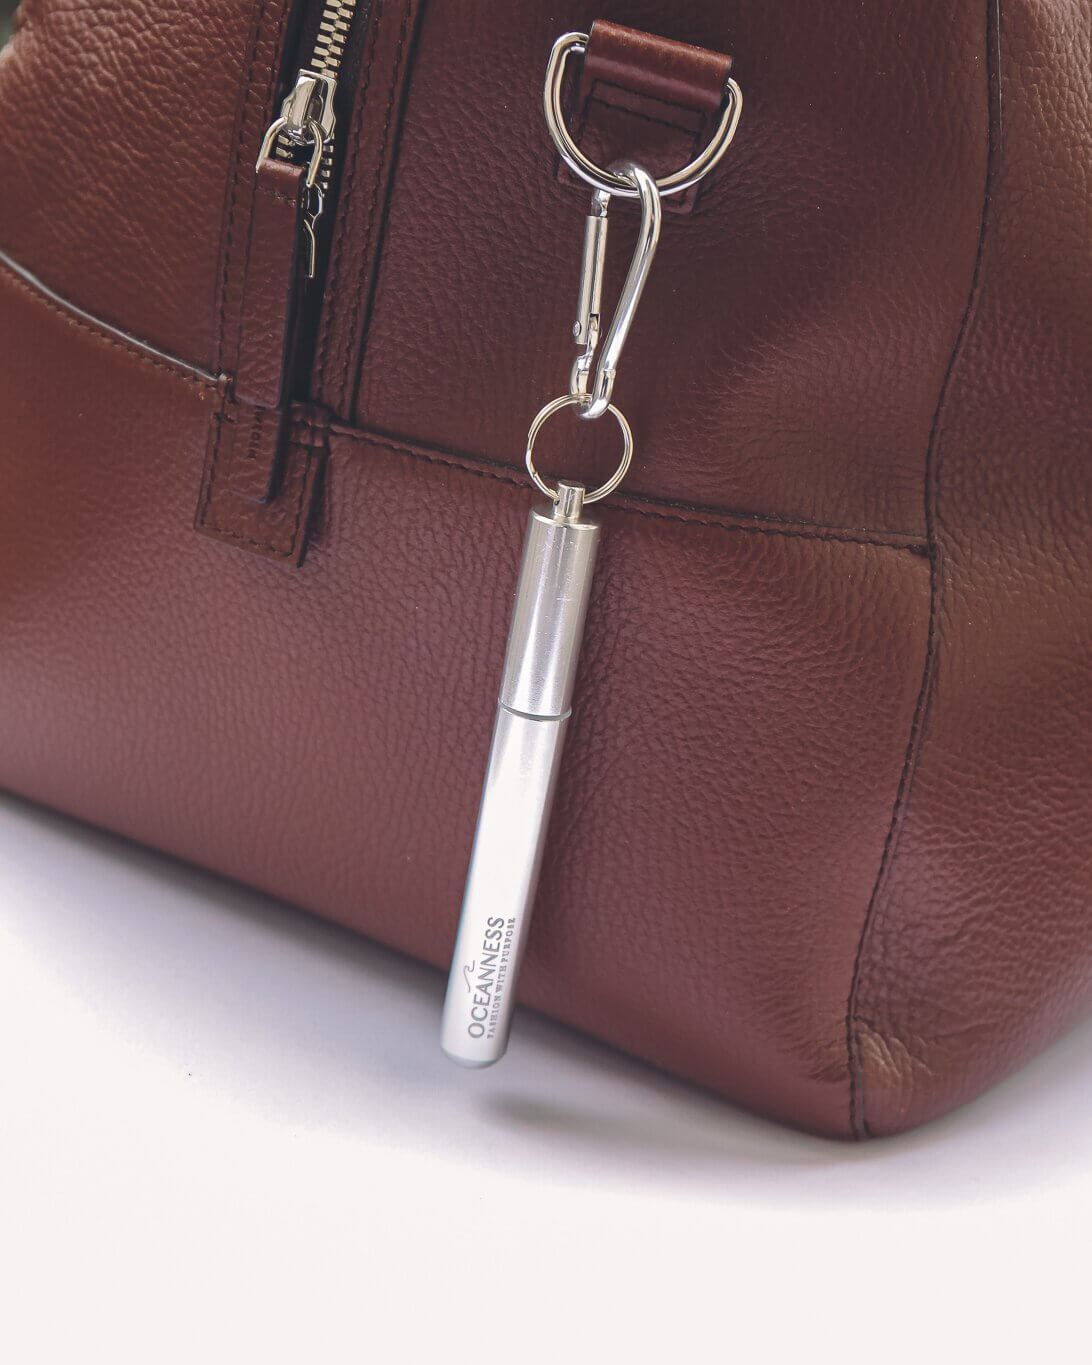 Oceanness silver reusable travel straw hanging on a bag with carabiner